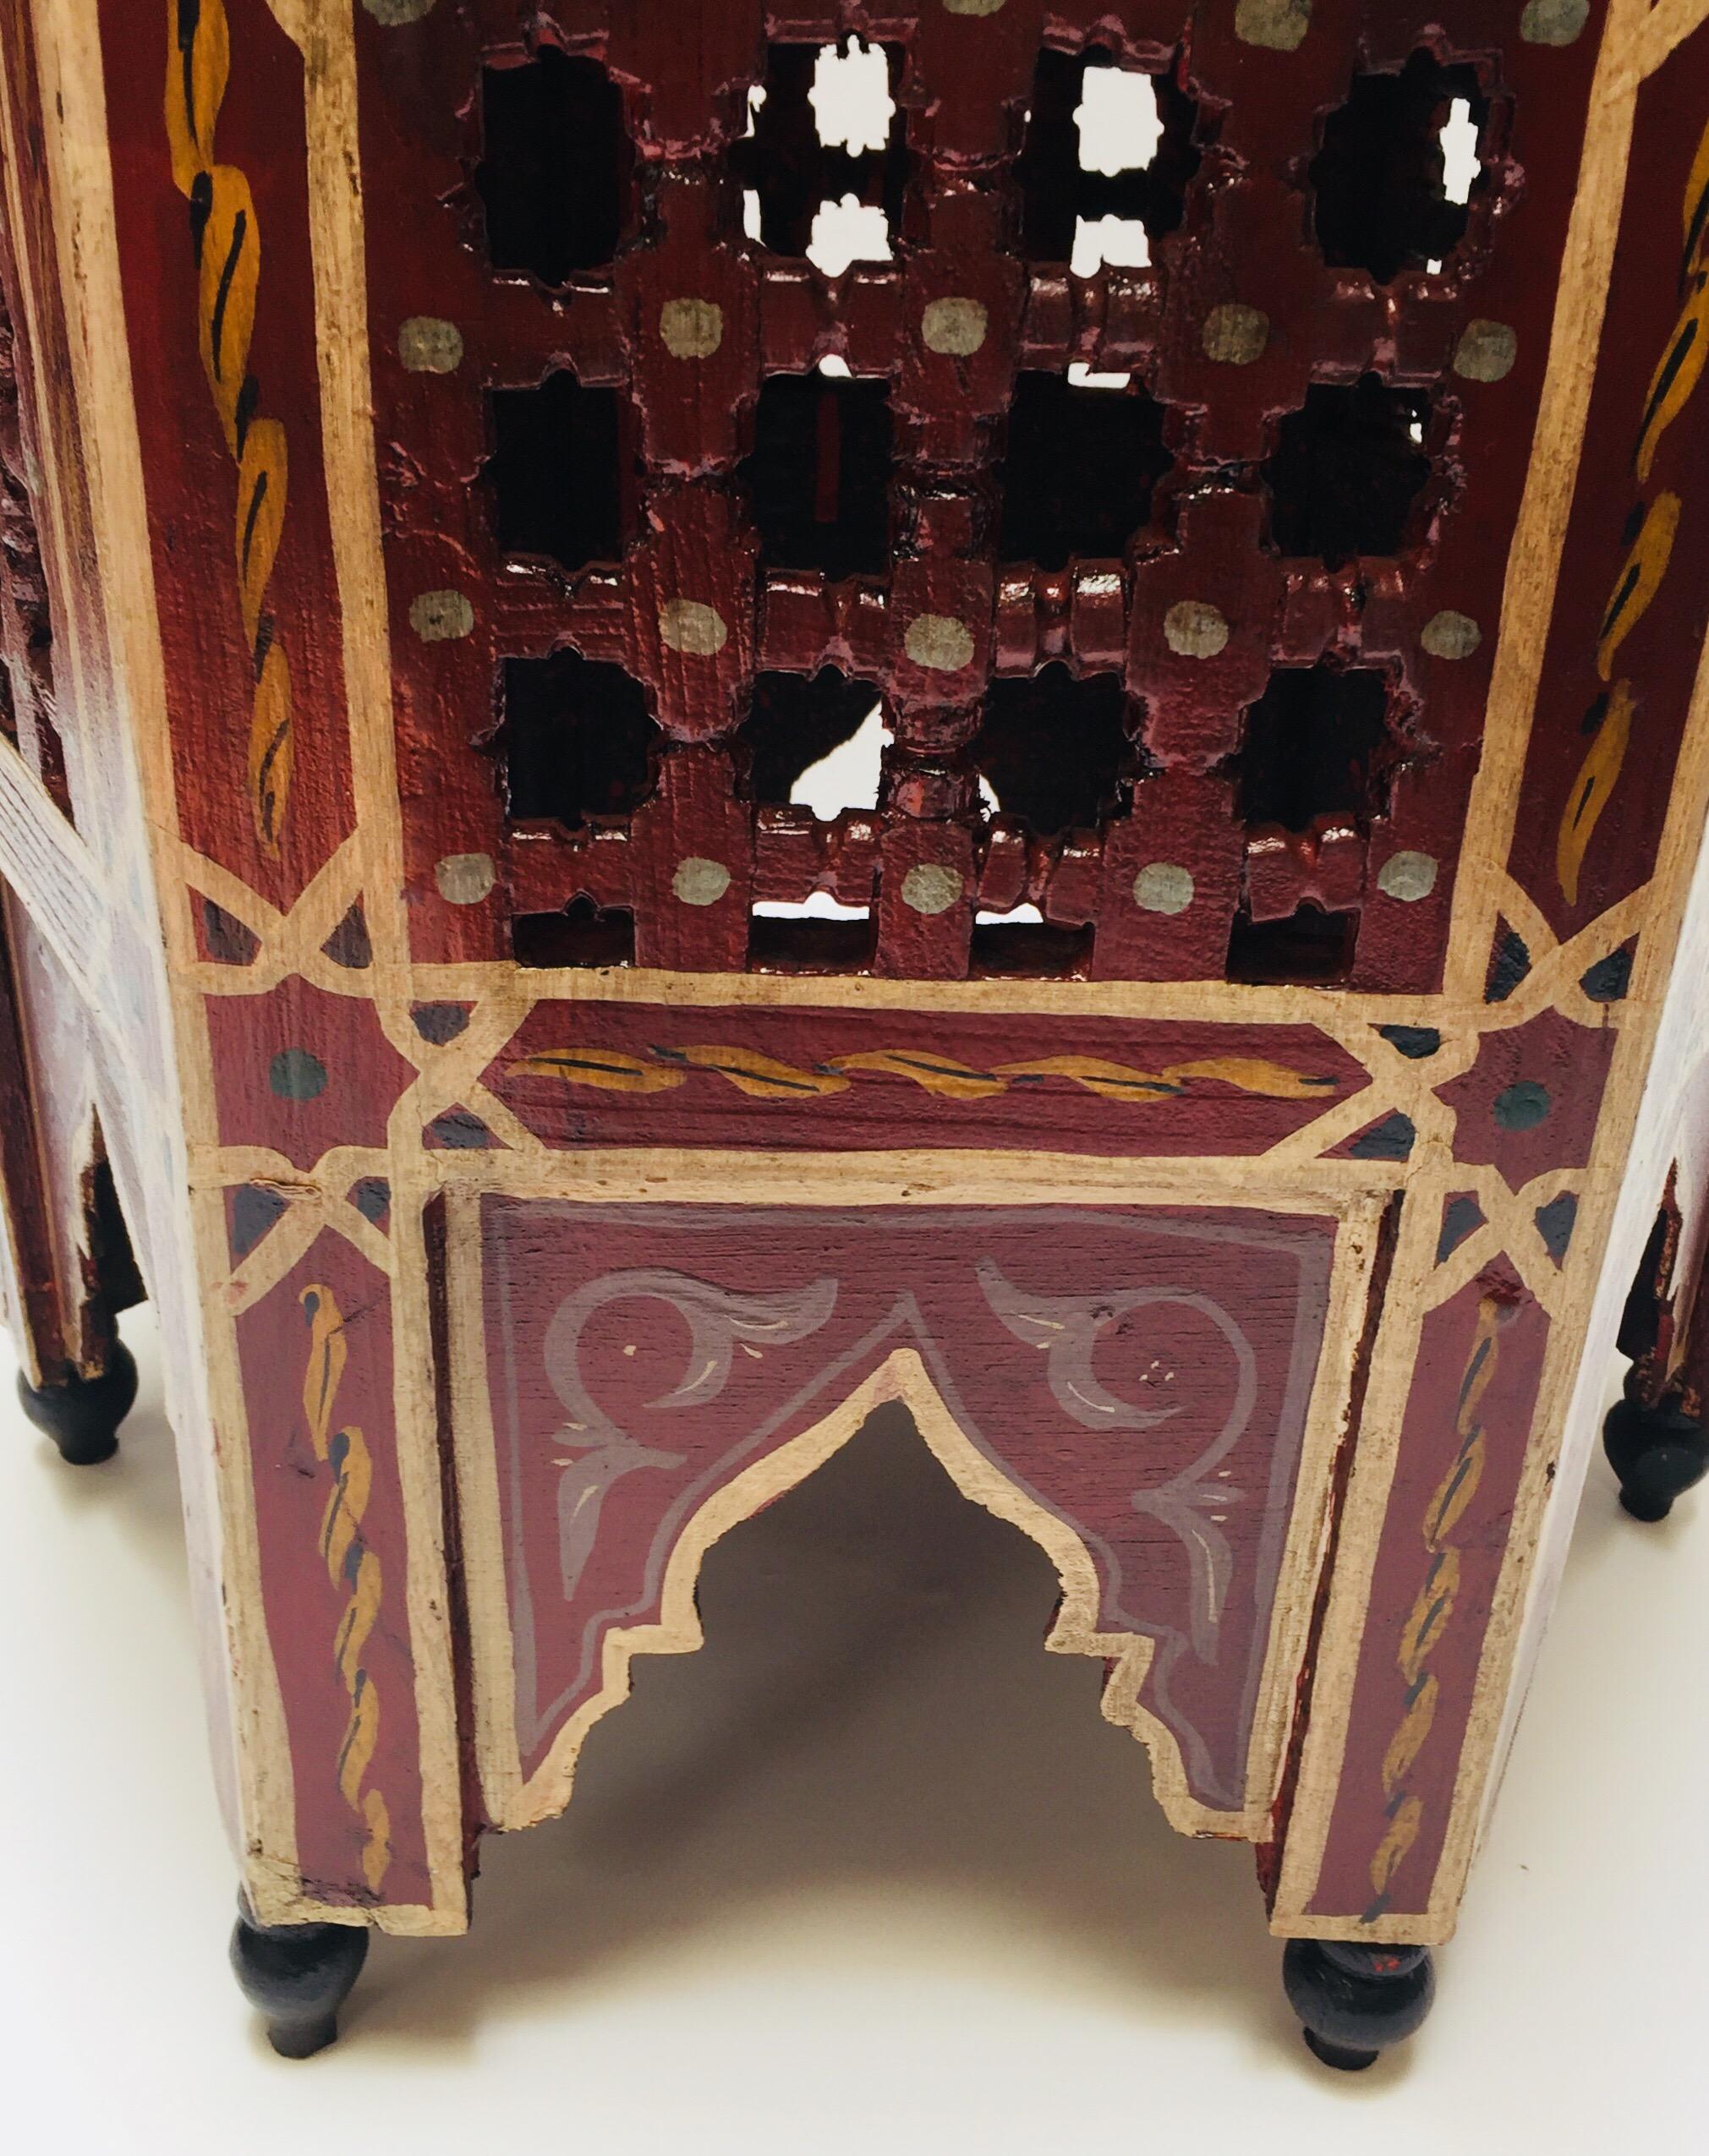 20th Century Moroccan Hand-Painted Side Table with Moorish Designs